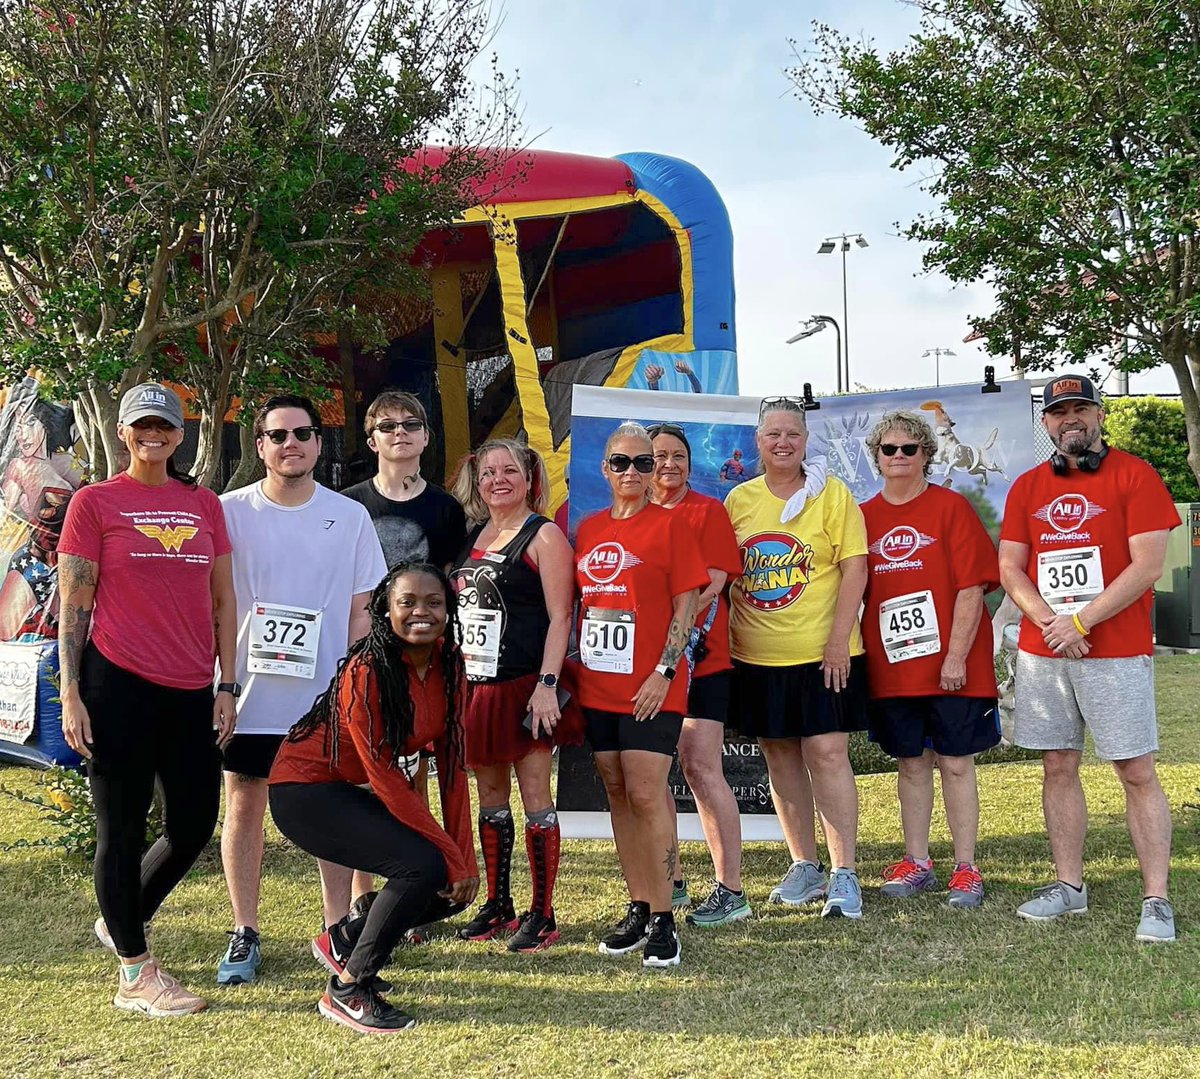 ⚡️Busted out our running shoes & dusted off our capes this morning for the Exchange Center for Child Abuse Prevention’s Annual Superhero 5K in Dothan ! 💙🦸🏻‍♂️🏃🏾‍♀️‍➡️ 

#childabuseprevention #childabuseawareness #lovedothan #wegiveback #creditunion #creditunionscare